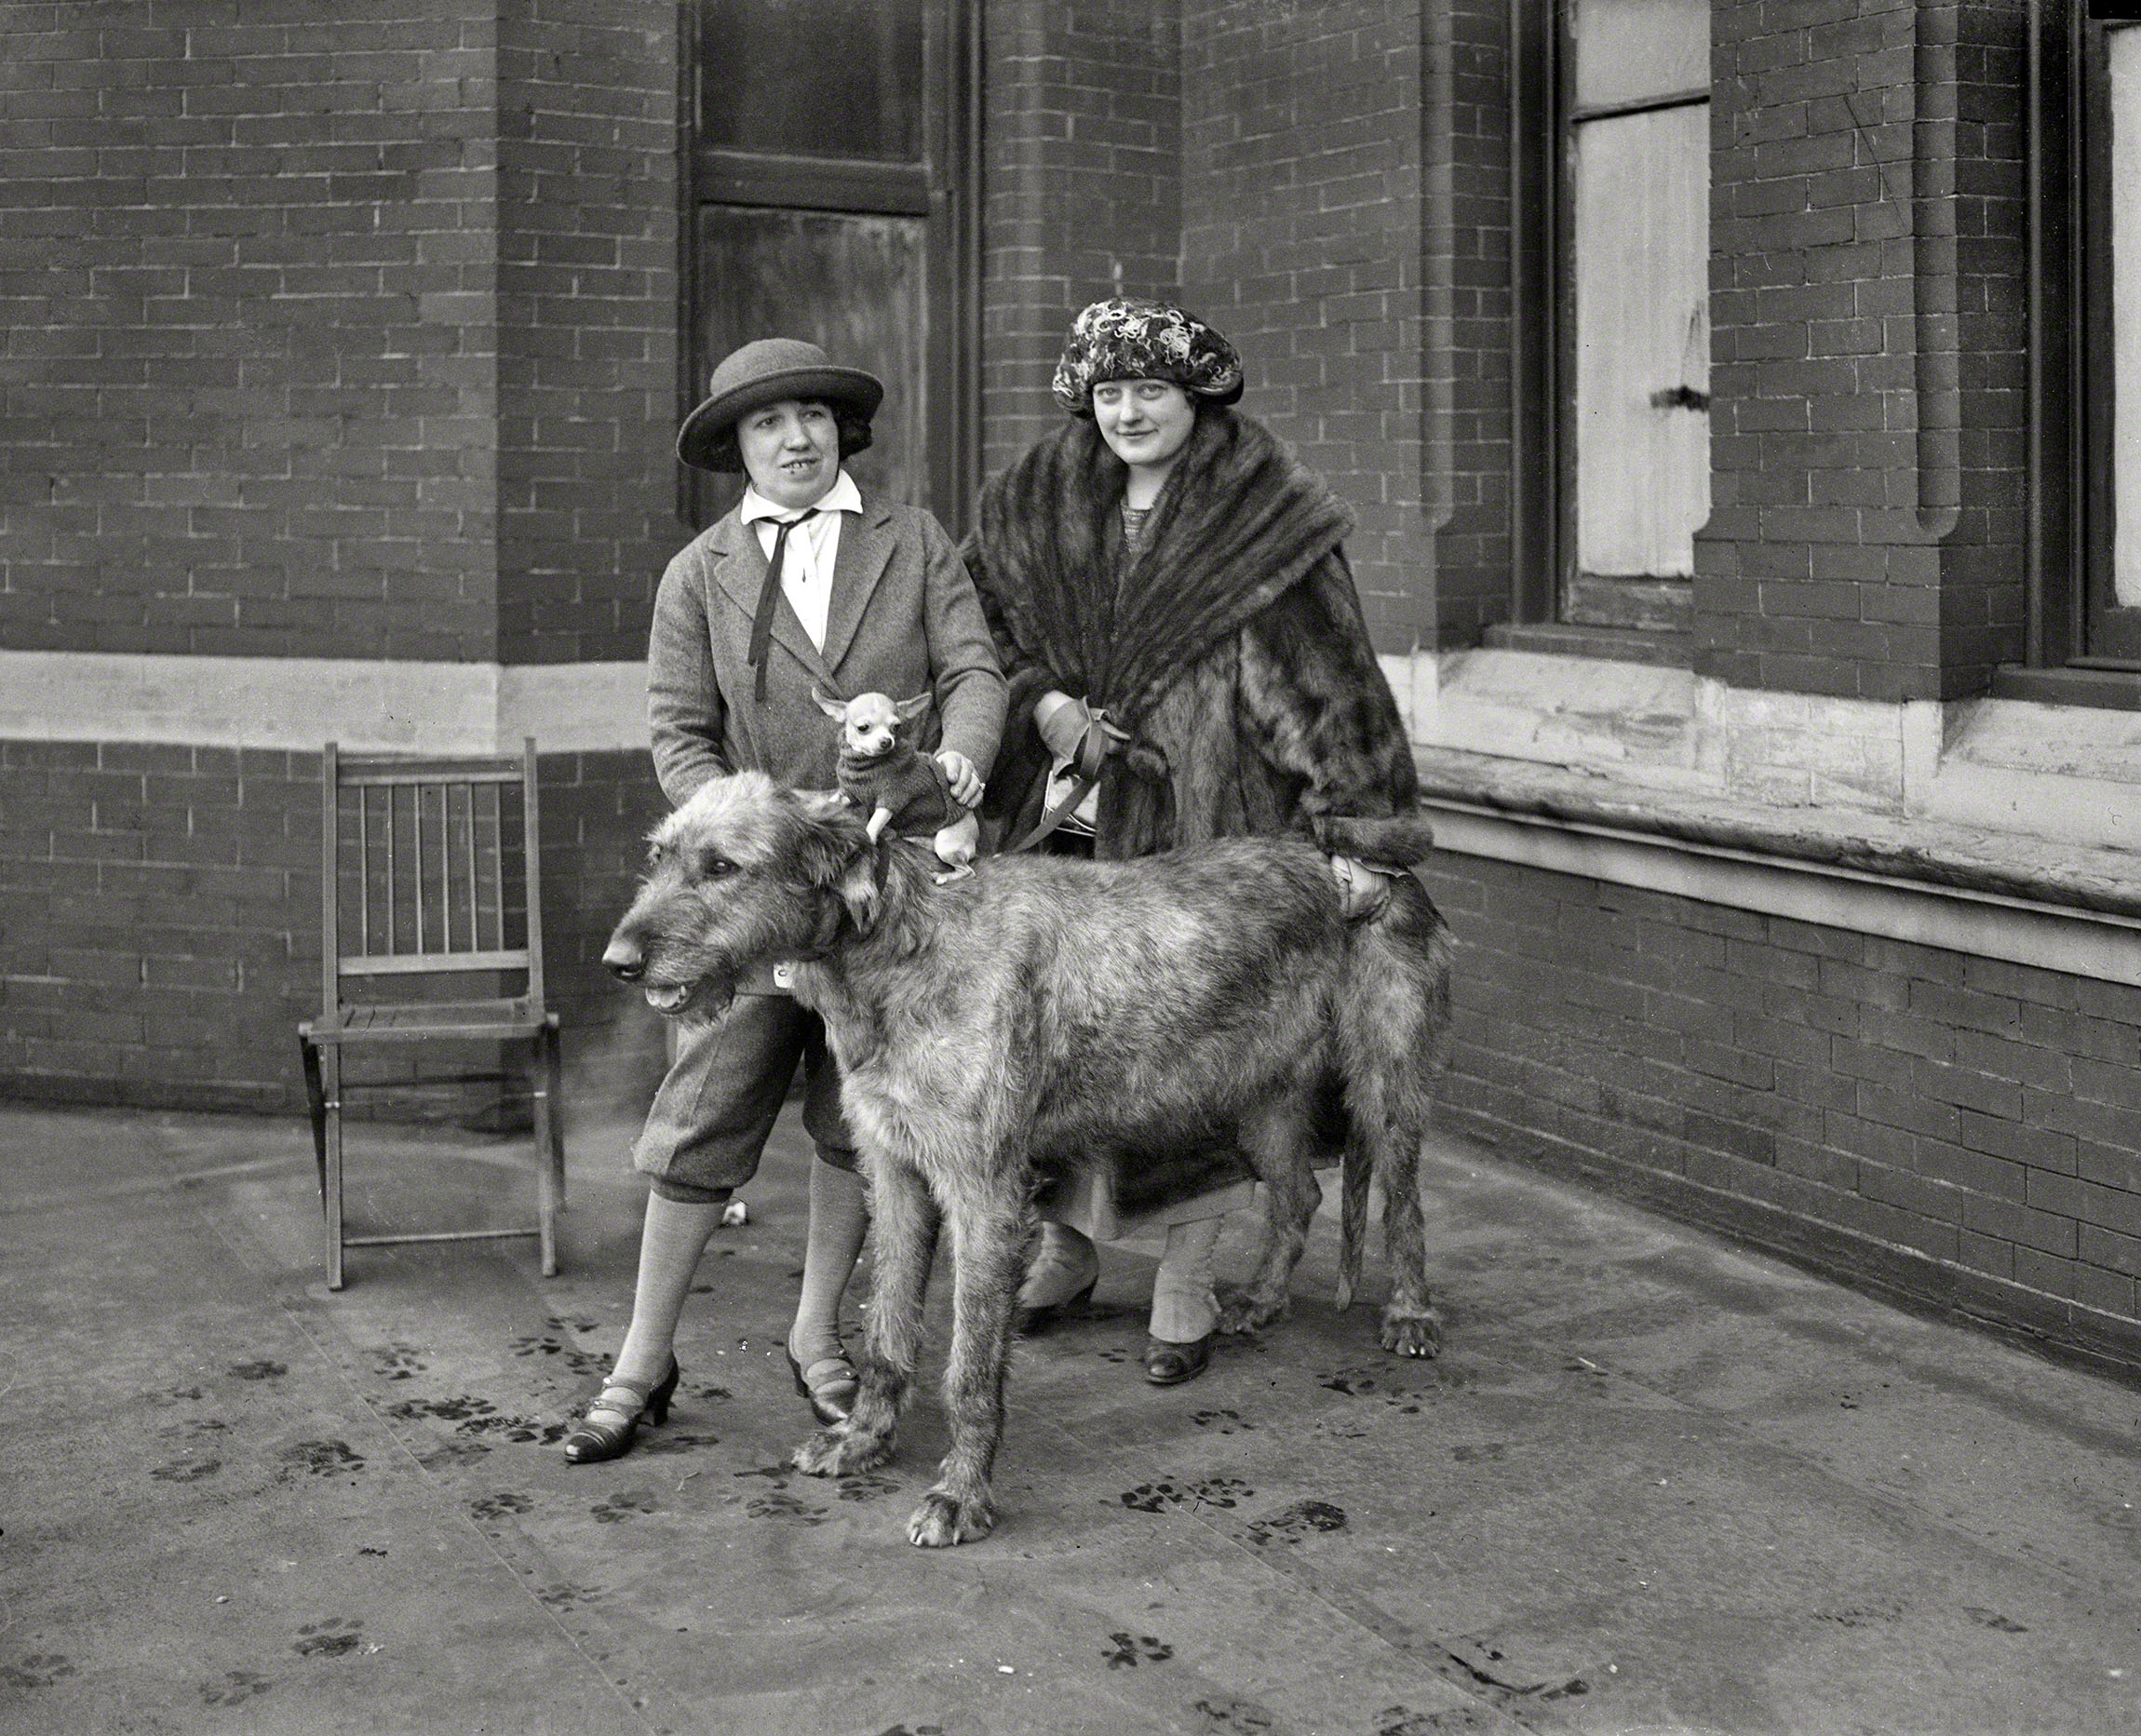 January 26, 1923. Washington, D.C. "Largest and smallest dog at dog show." Previously seen here. Harris & Ewing glass negative. View full size.